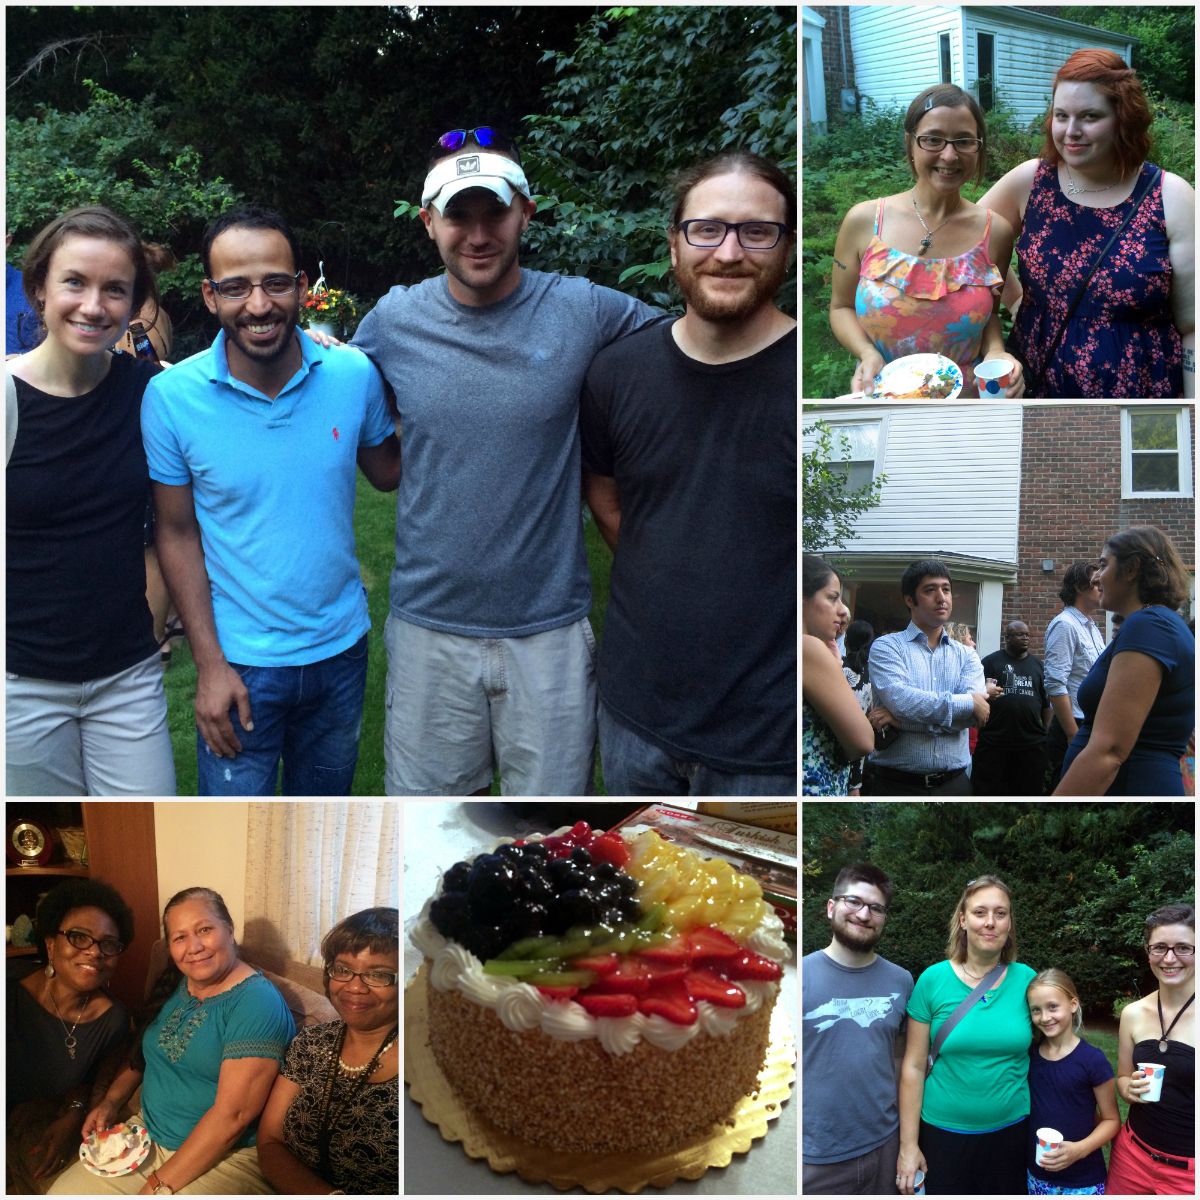 Students and faculty gathered at the 11th Annual Grad Student-Faculty Picnic